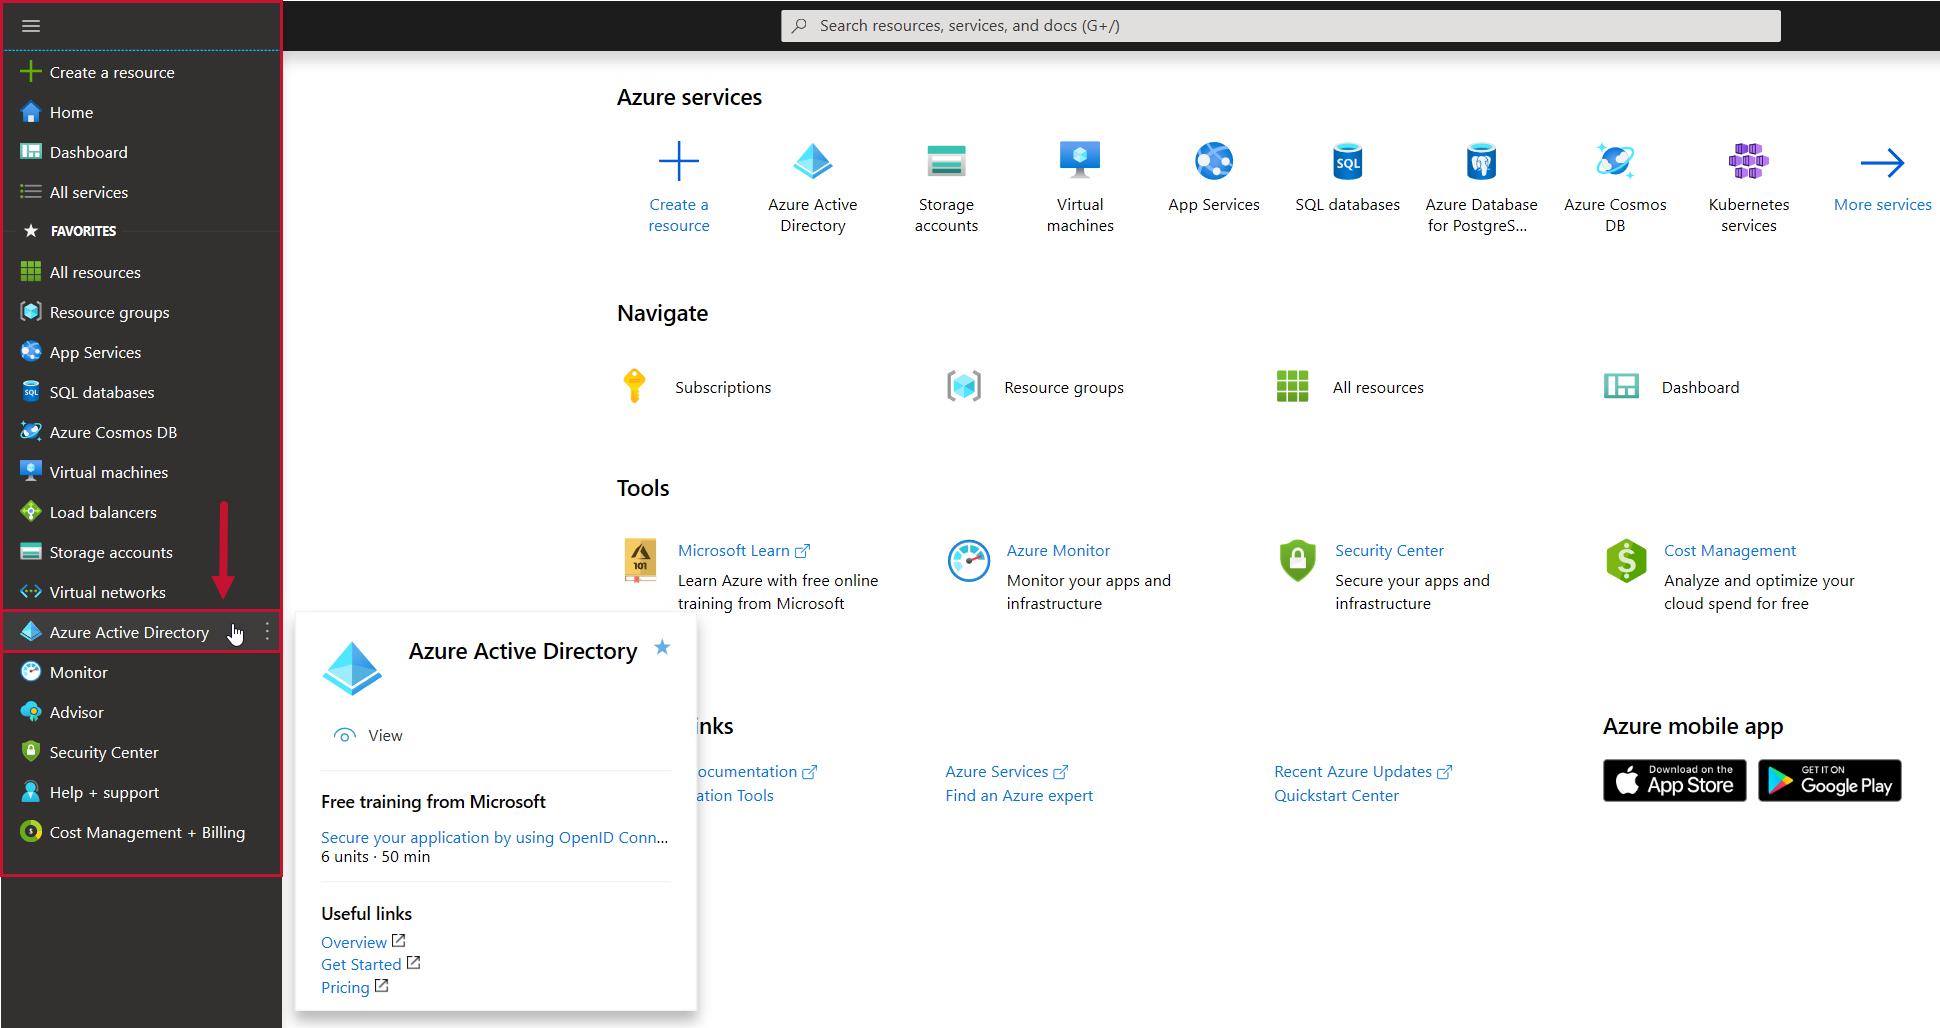 Log in to Azure Portal and select Azure Active Directory